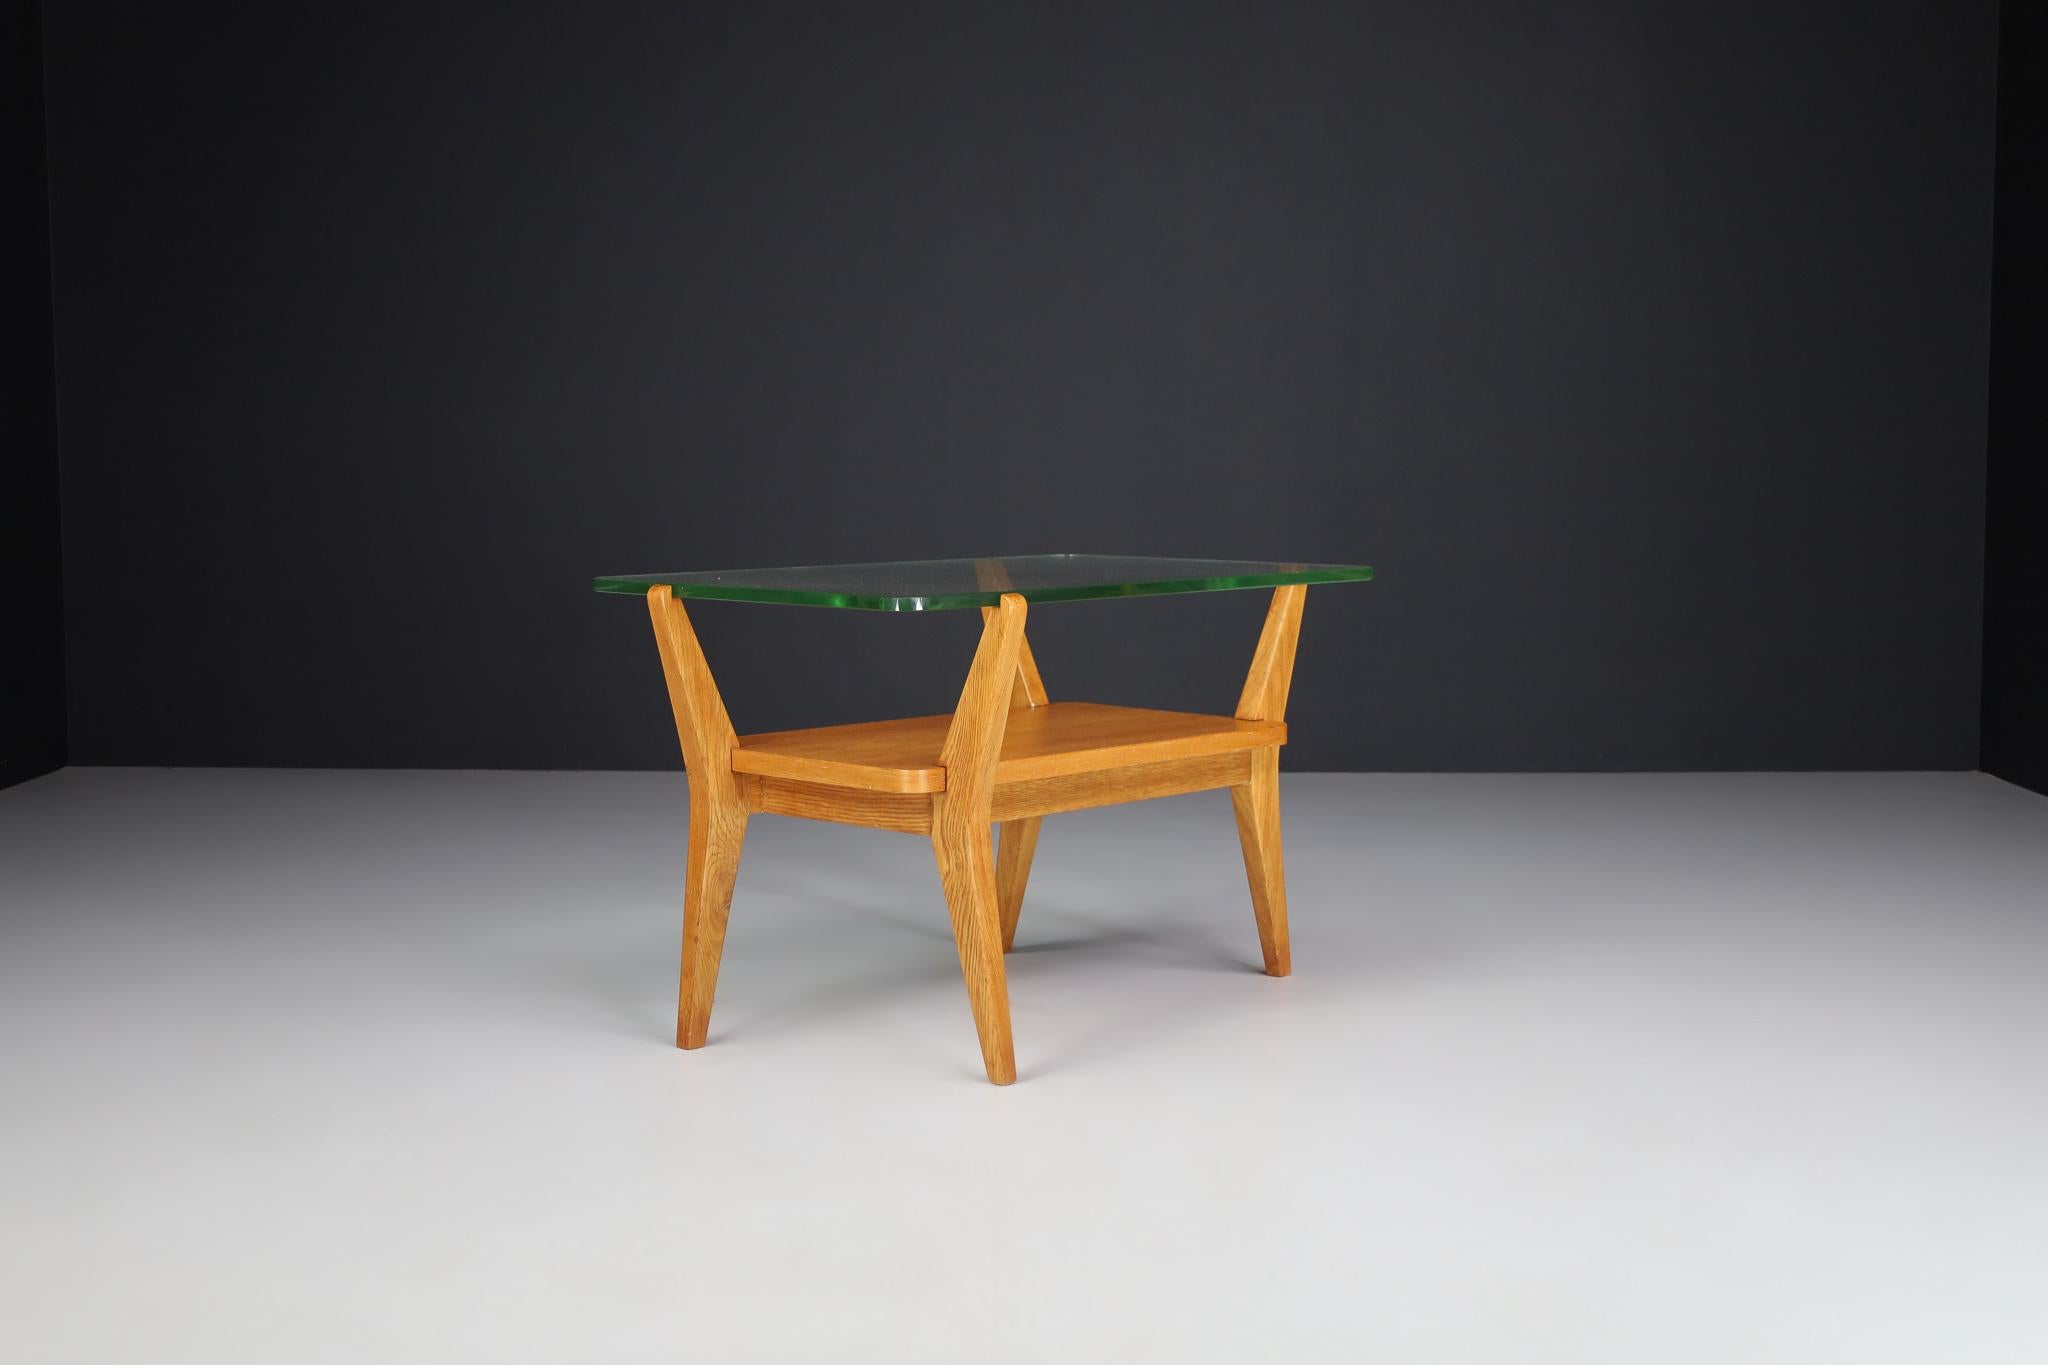 Mid-Century Modern Ash Wood and Glass Coffee Table, Praque, 1950s For Sale 3